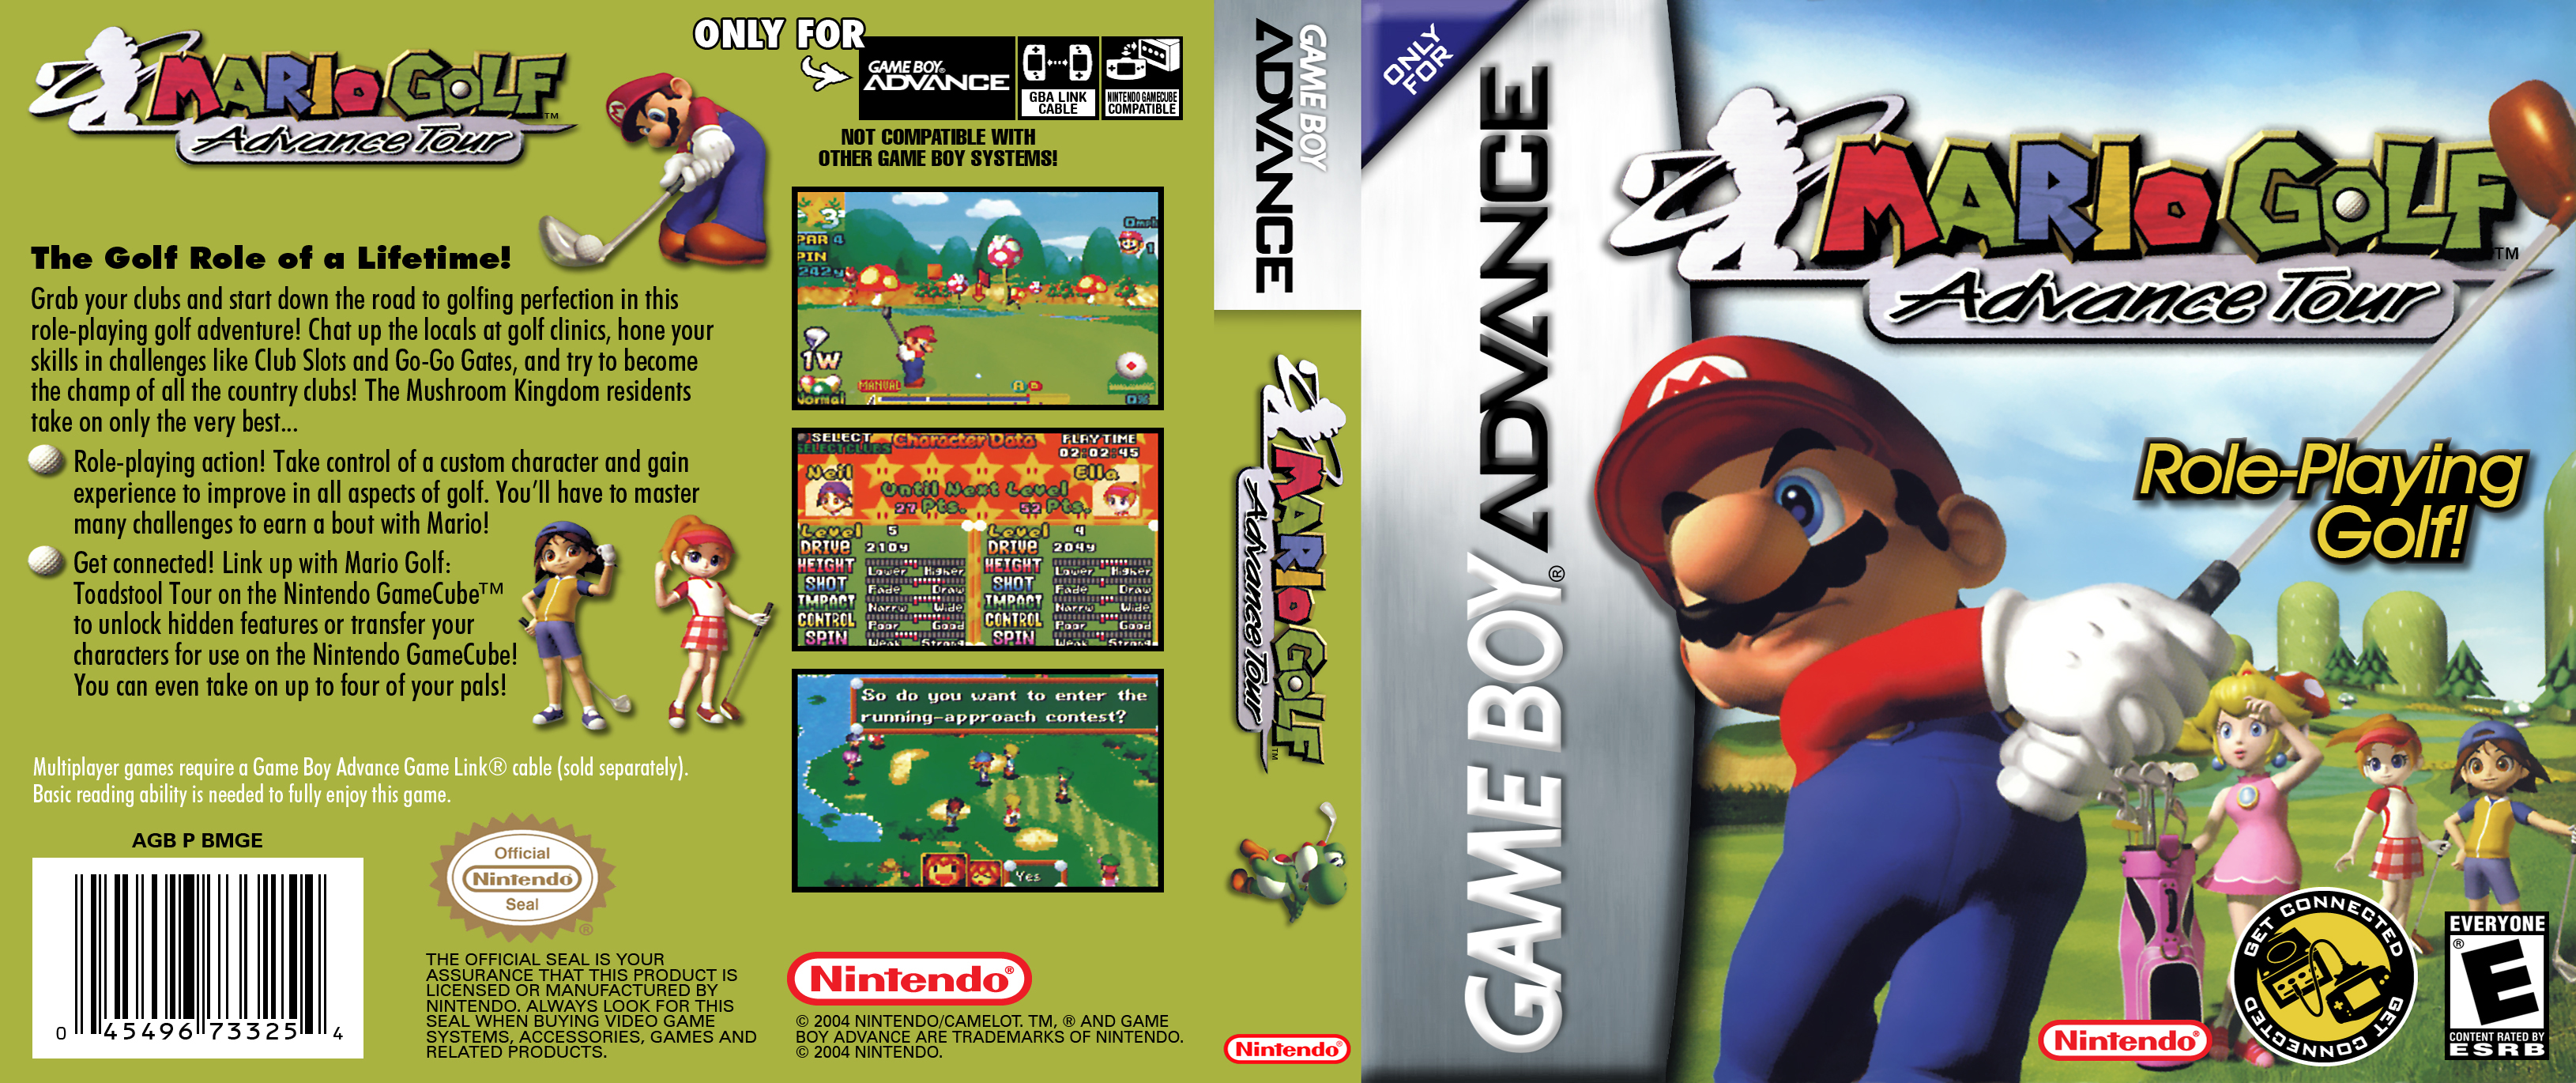 Mario Golf Advance Tour Gameboy Advance Covers Cover Century Over 500 000 Album Art Covers For Free